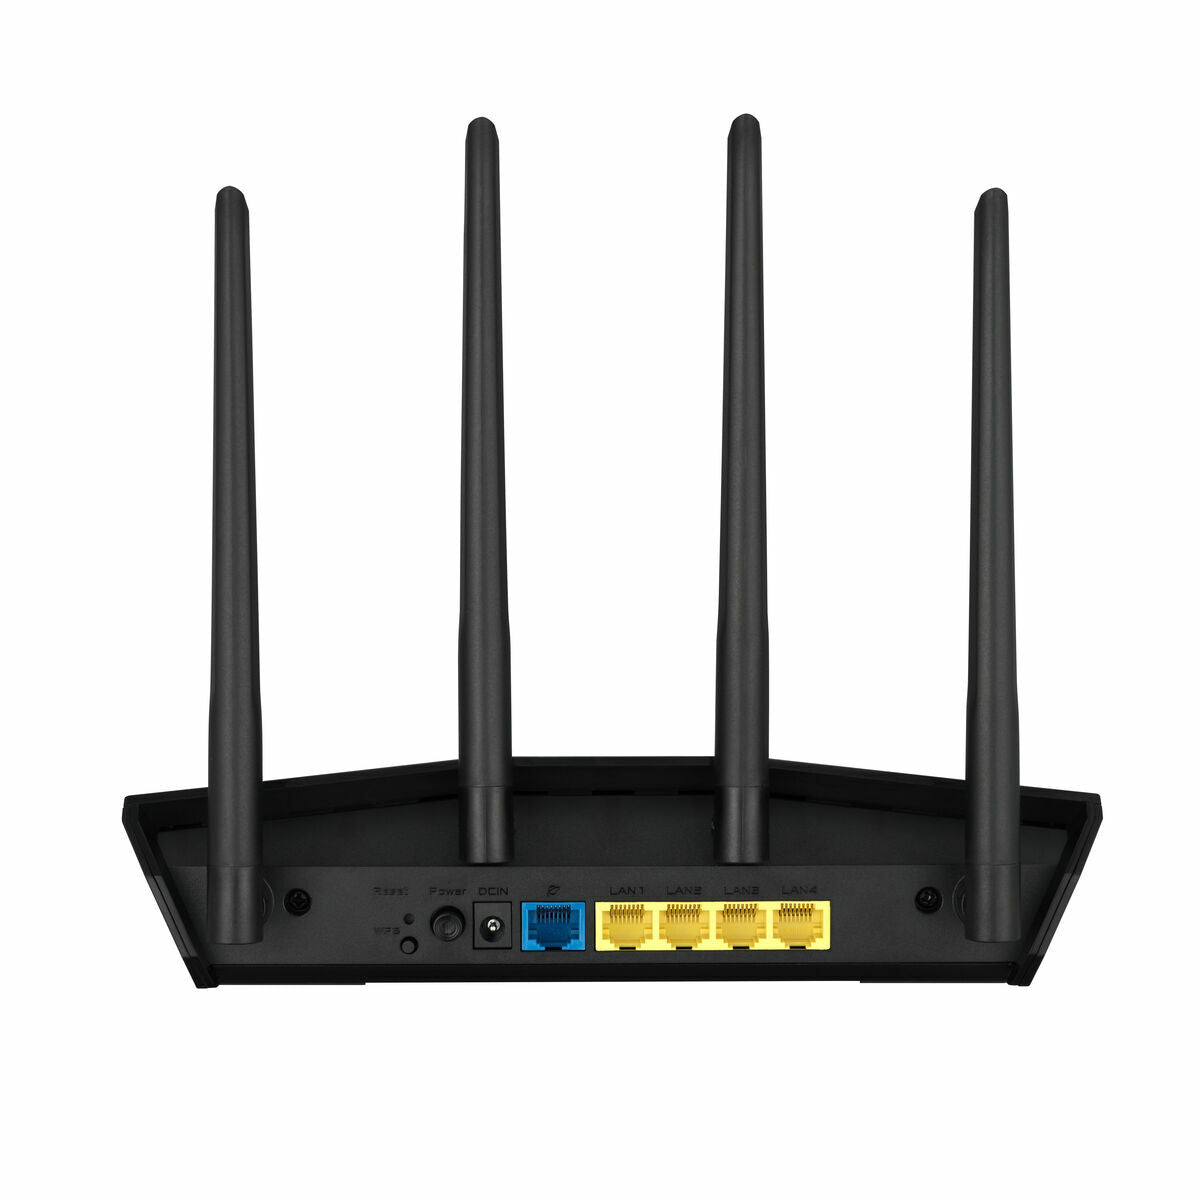 Router Asus RT-AX57 Black, Asus, Computing, Network devices, router-asus-rt-ax57-black, Brand_Asus, category-reference-2609, category-reference-2803, category-reference-2826, category-reference-t-19685, category-reference-t-19914, Condition_NEW, networks/wiring, Price_100 - 200, Teleworking, RiotNook